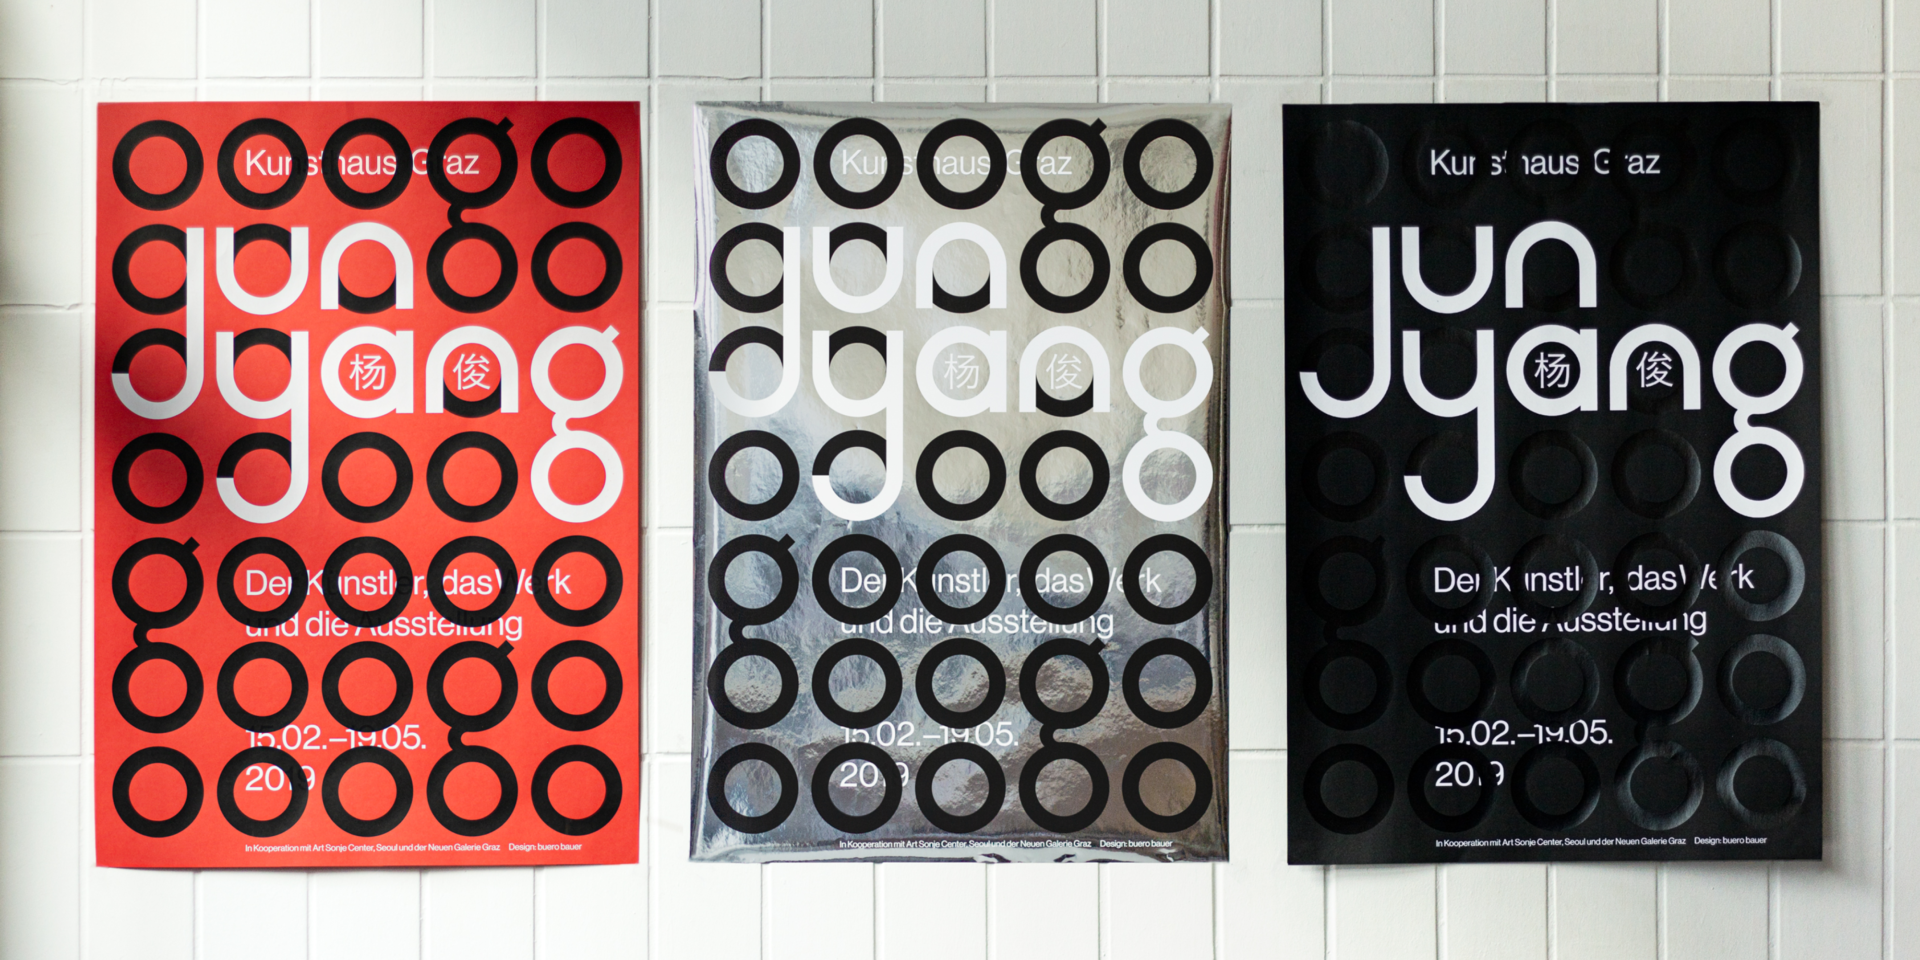 Silkscreen poster series (limited artist edition): Black and white print on red, black and mirror-foil paper.